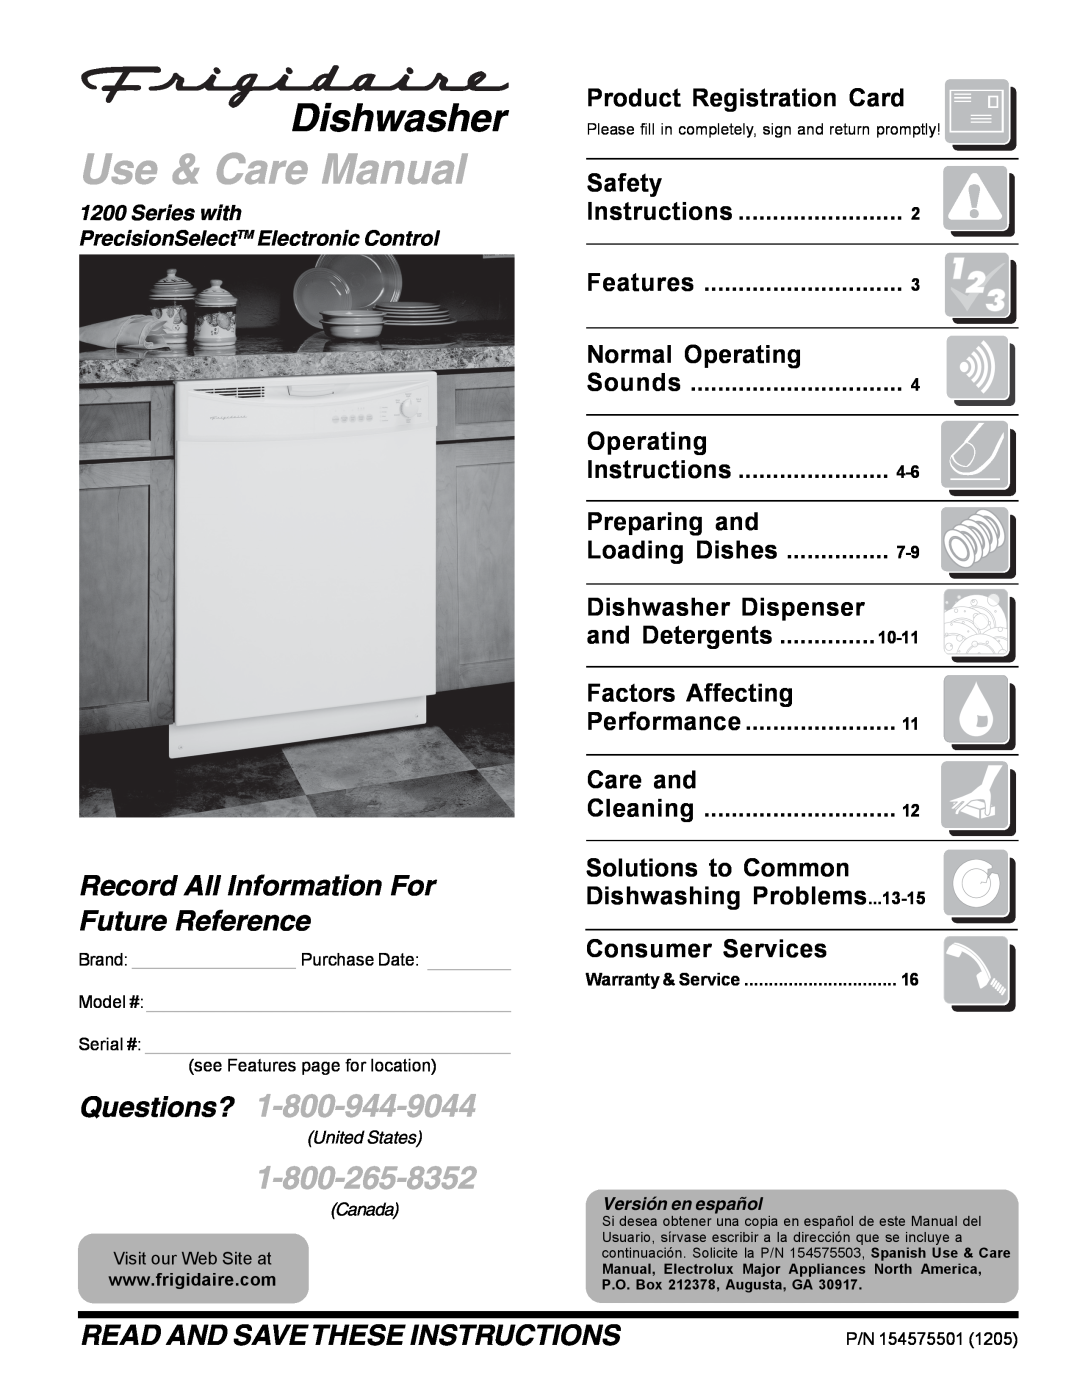 Frigidaire 1200 warranty Product Registration Card, Safety, Normal Operating, Preparing and, Dishwasher Dispenser 